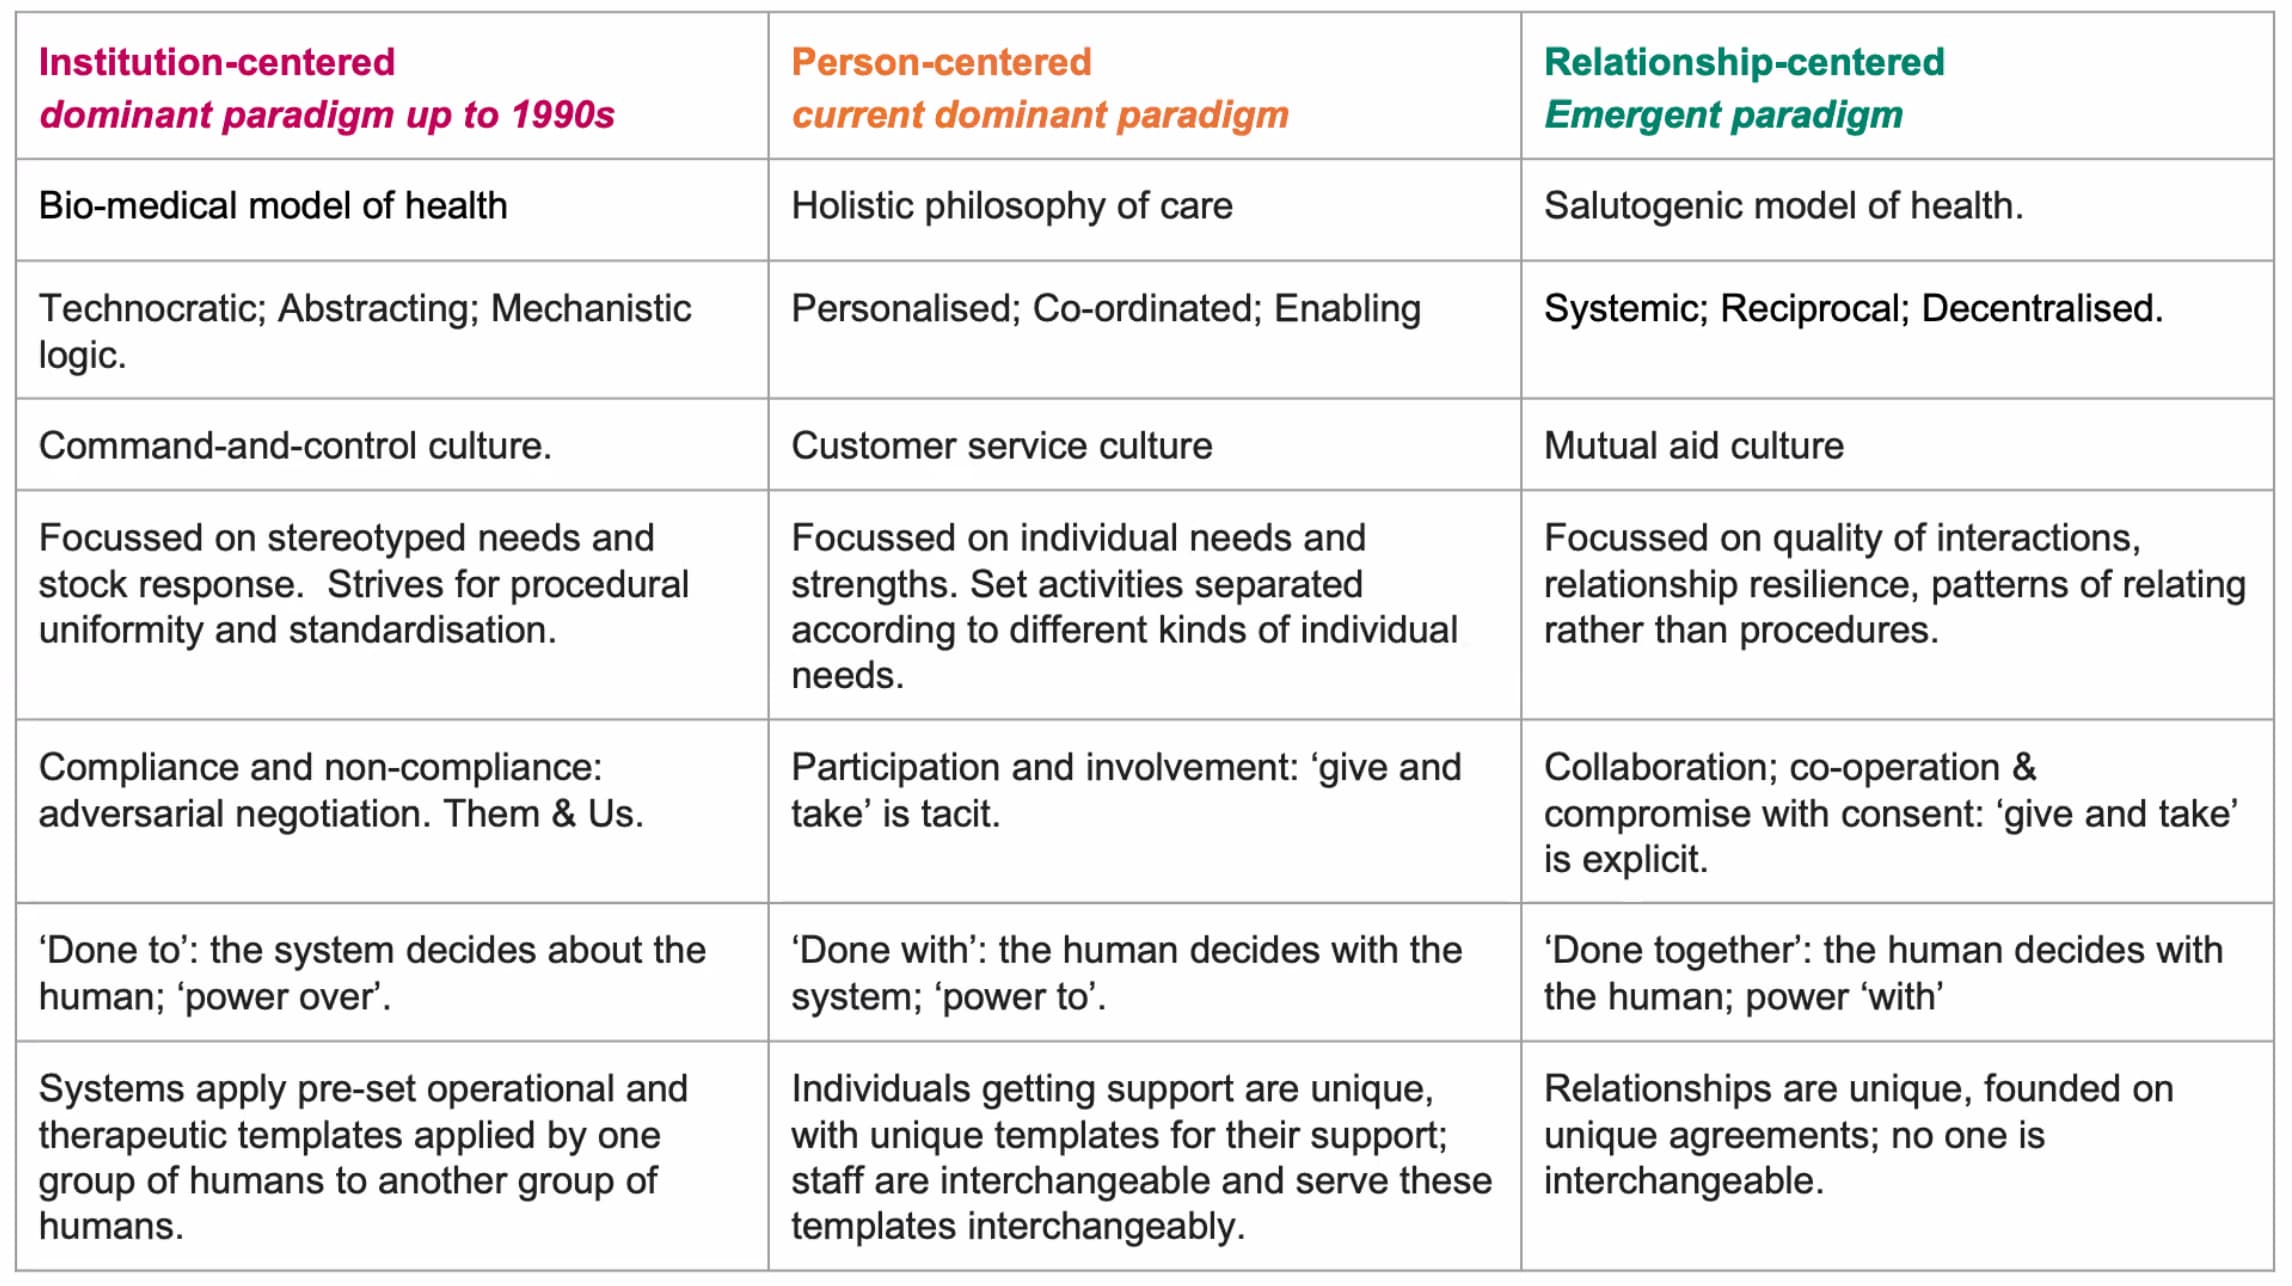 A summary of the differences between Institution, Personal and Relationship-centered care models